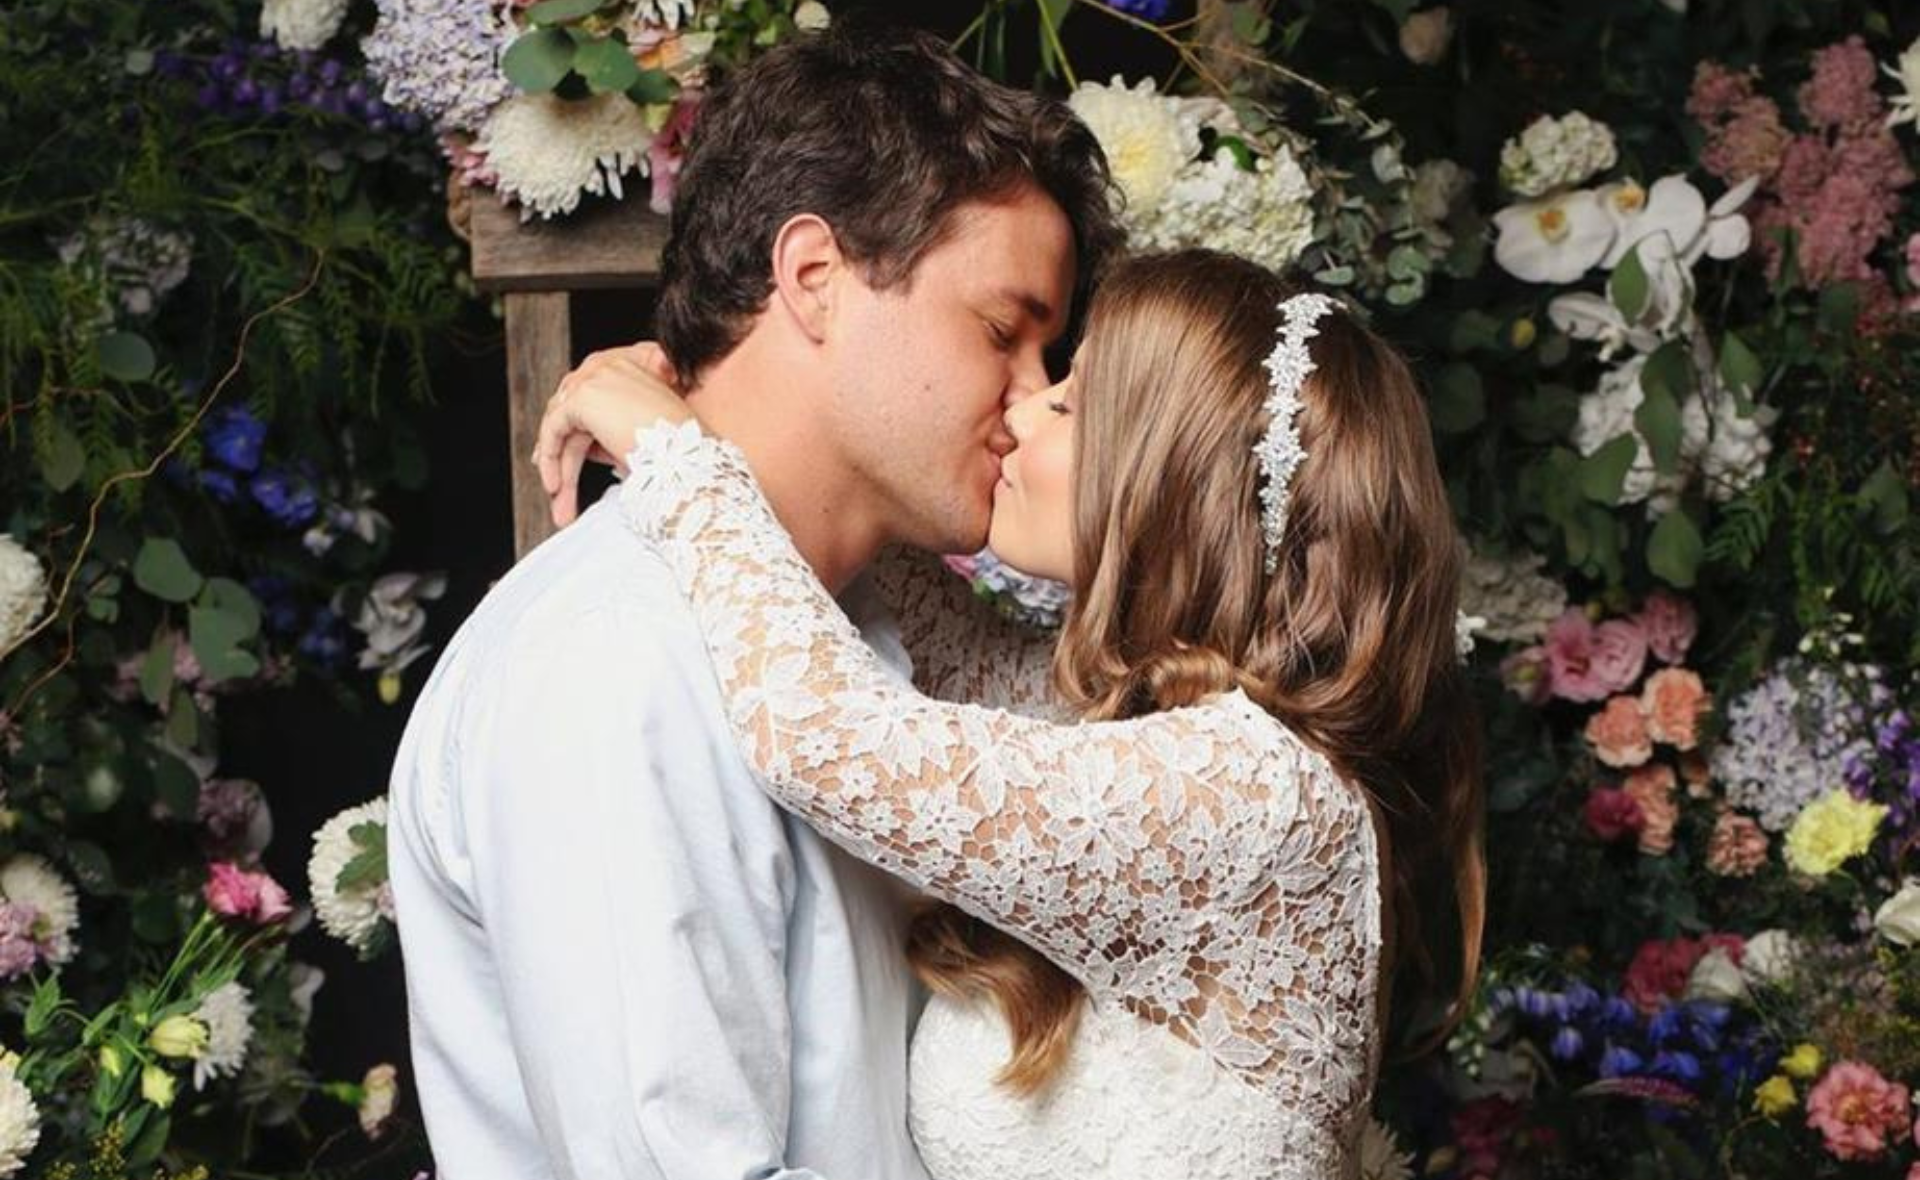 Bindi Irwin divulges on plans to renew her wedding vows with Chandler Powell